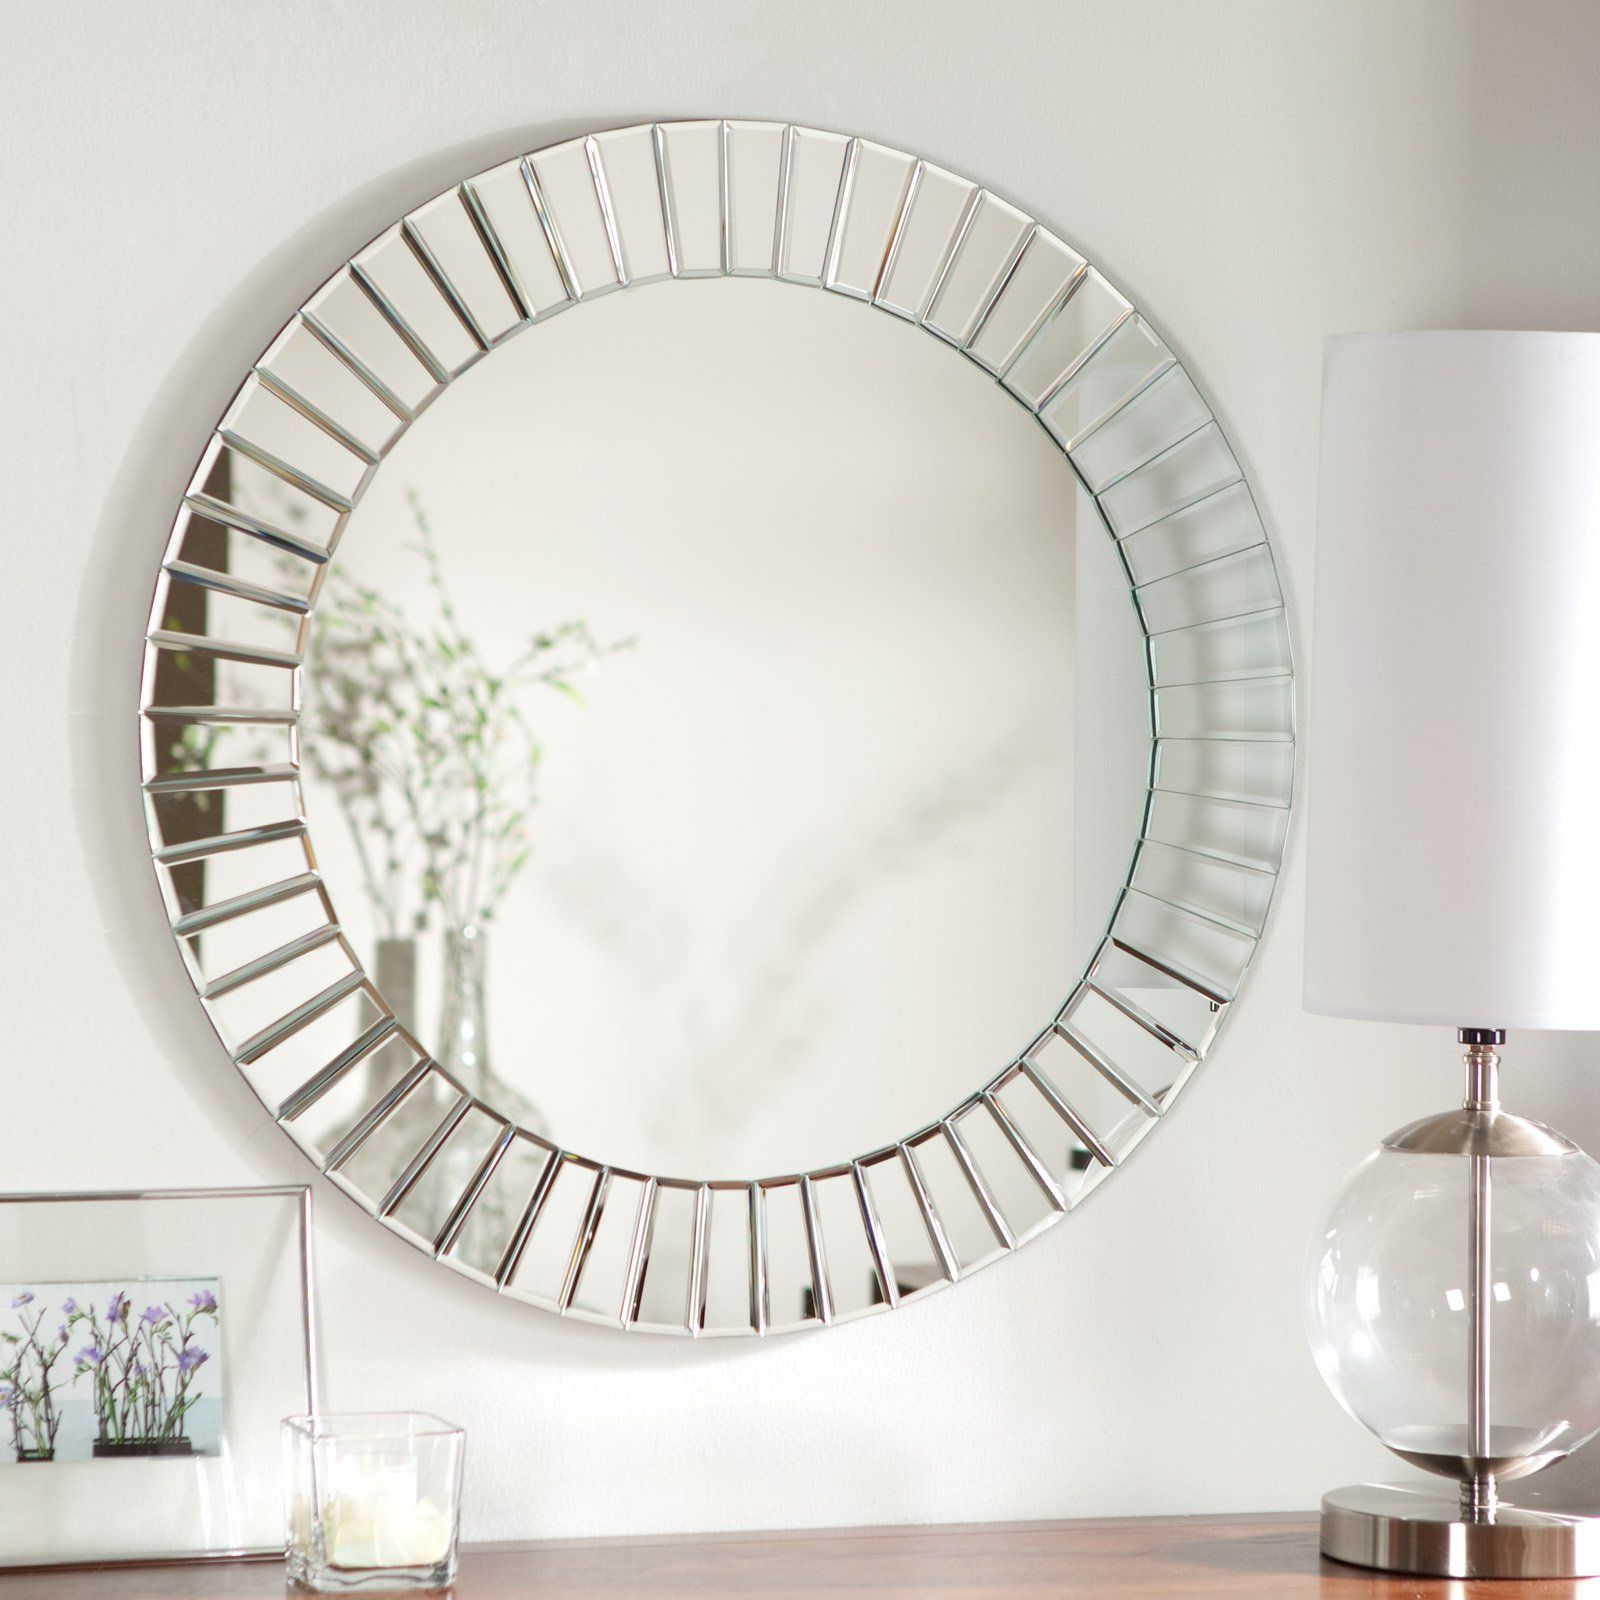 Popular Remarkable Decorative Beveled Wall Mirrors Frame Large Three For Small Round Decorative Wall Mirrors (View 14 of 20)